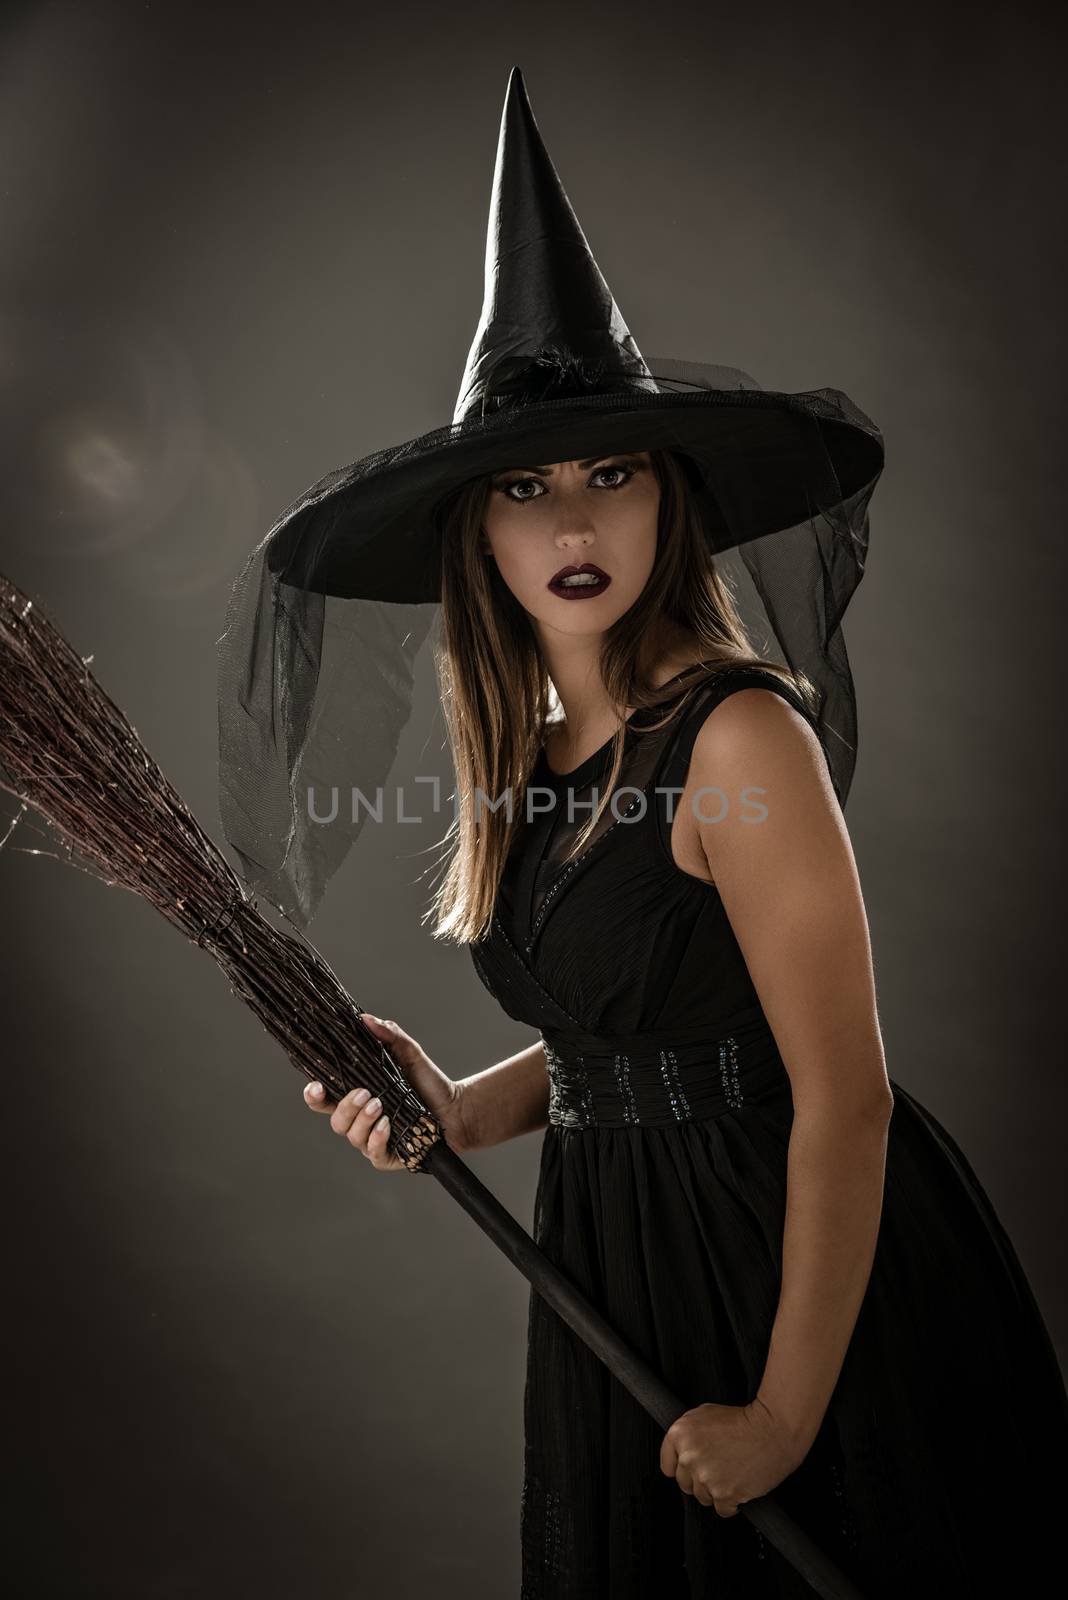 Young woman dressed like a witch. She is in dark clothing and holding a broom. Looking at camera.